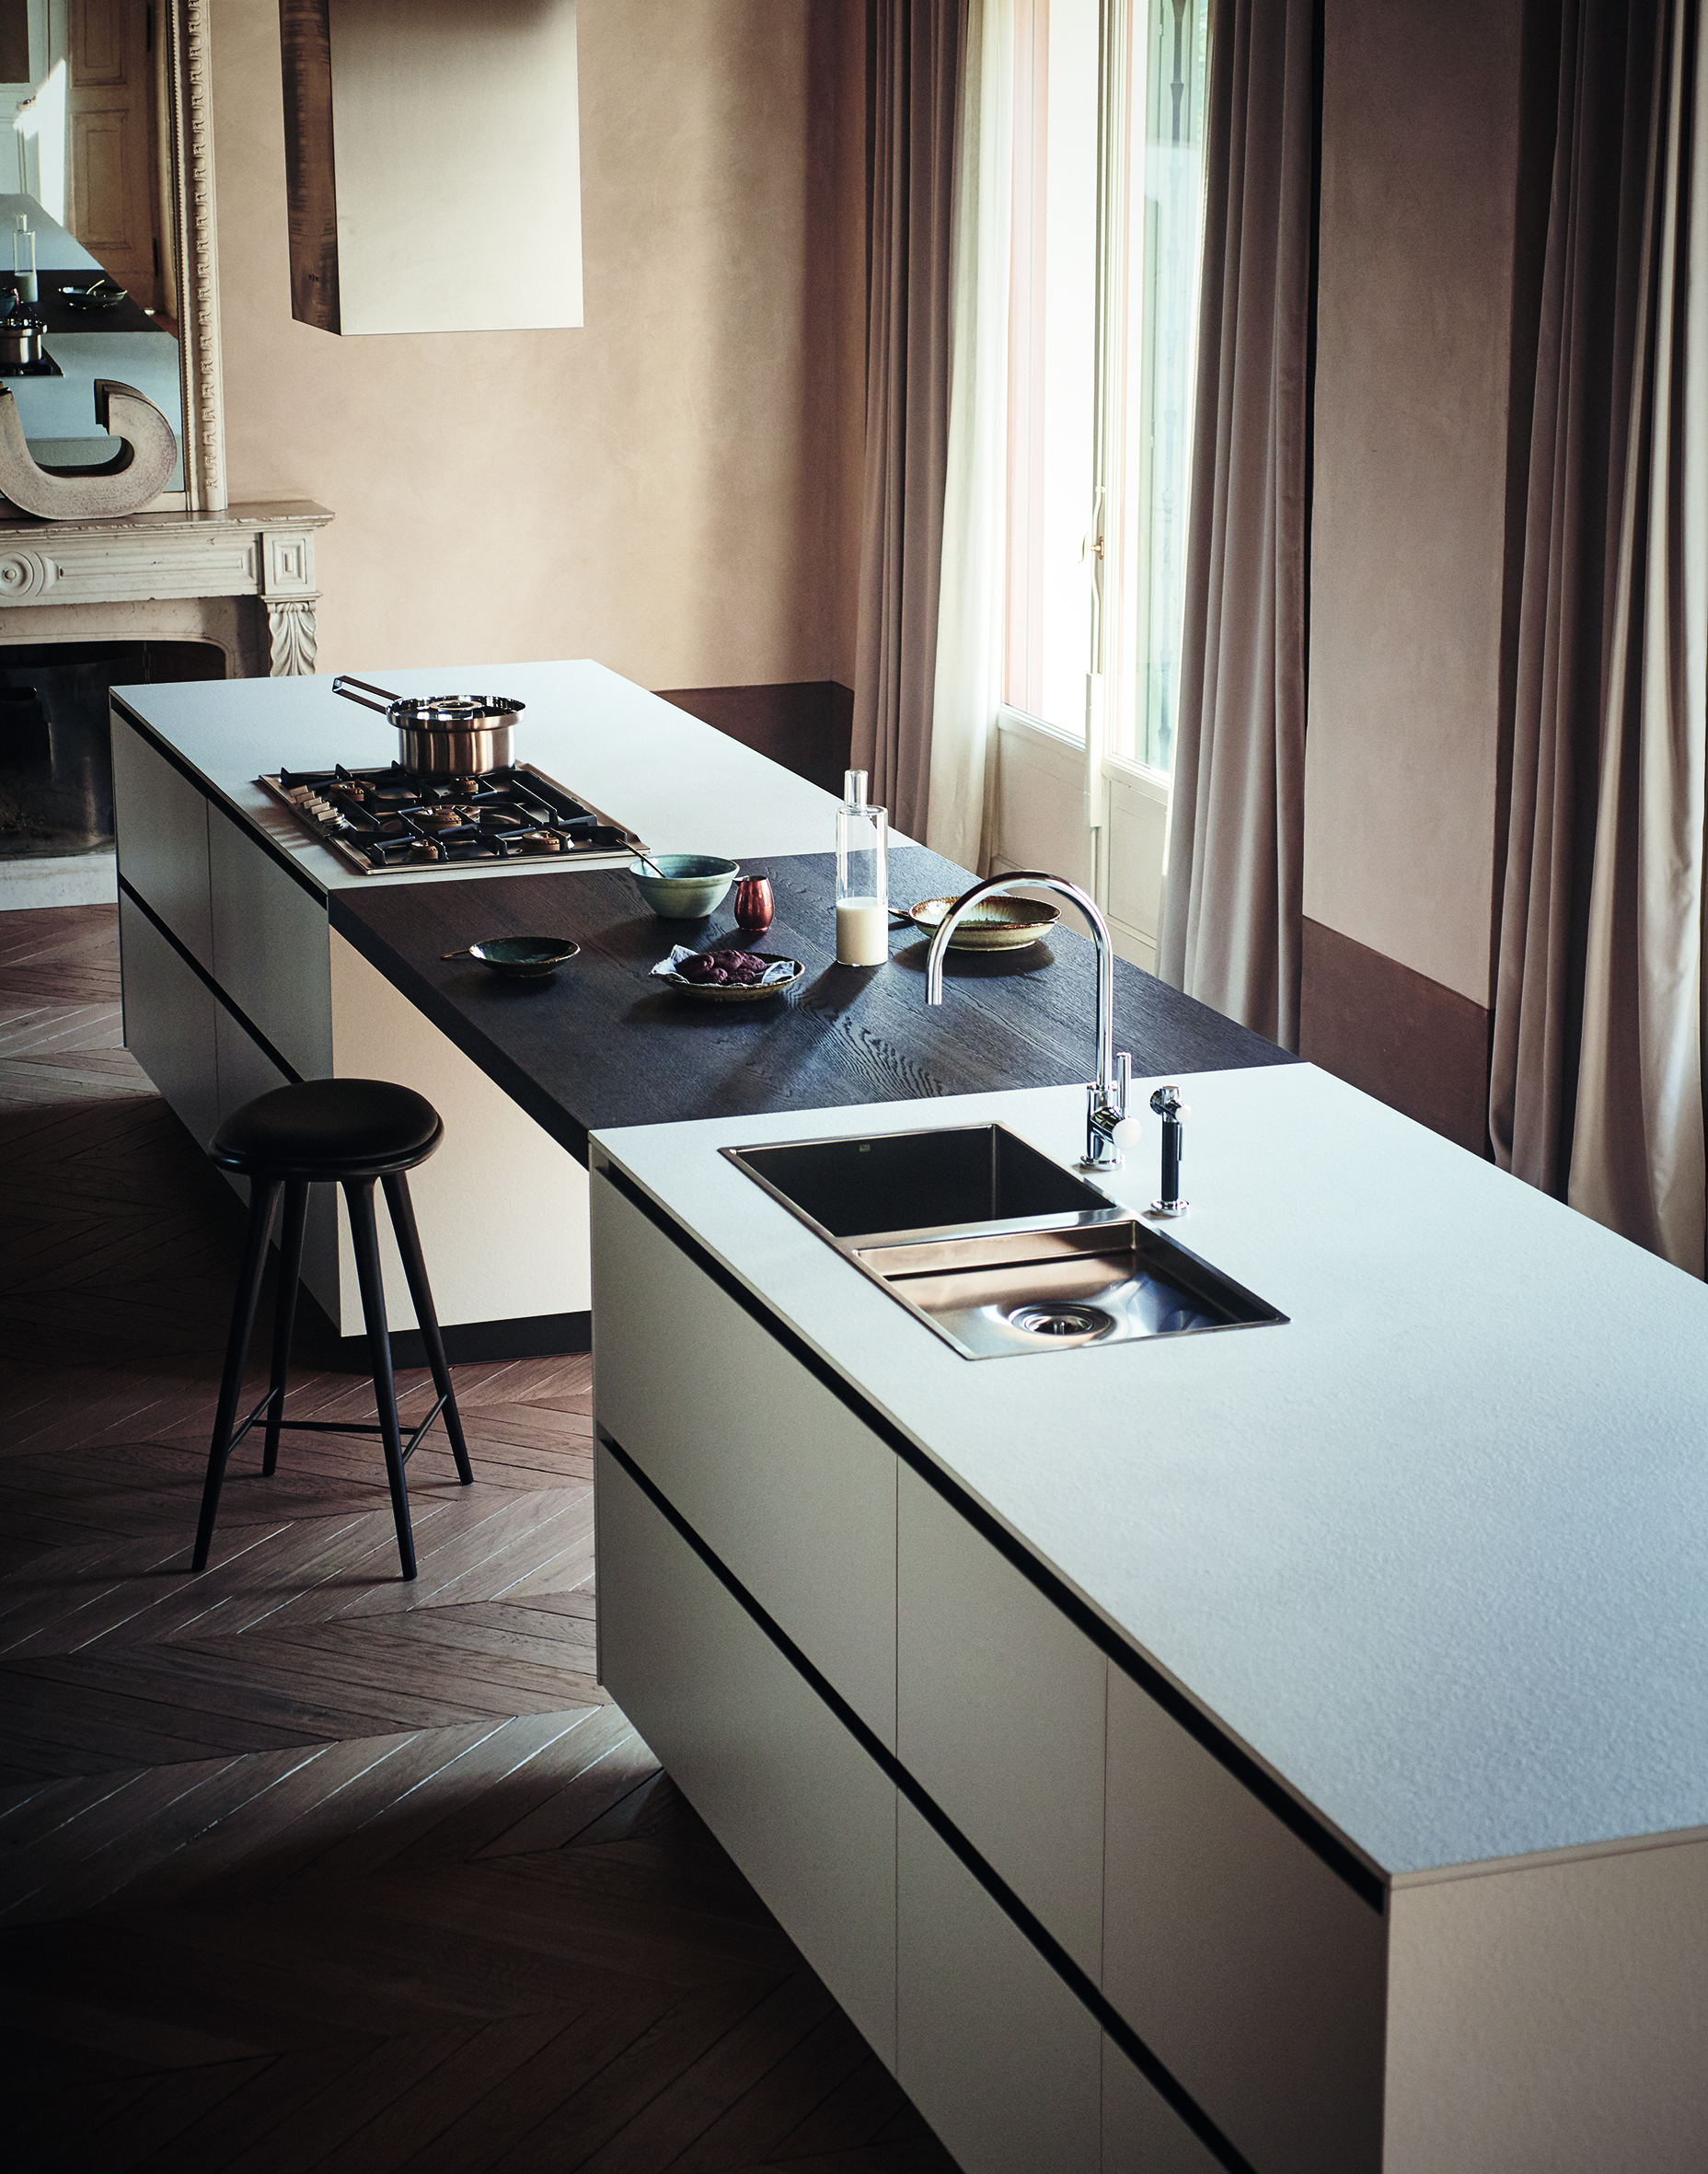 Maxima 2.2 kitchen by Cesar